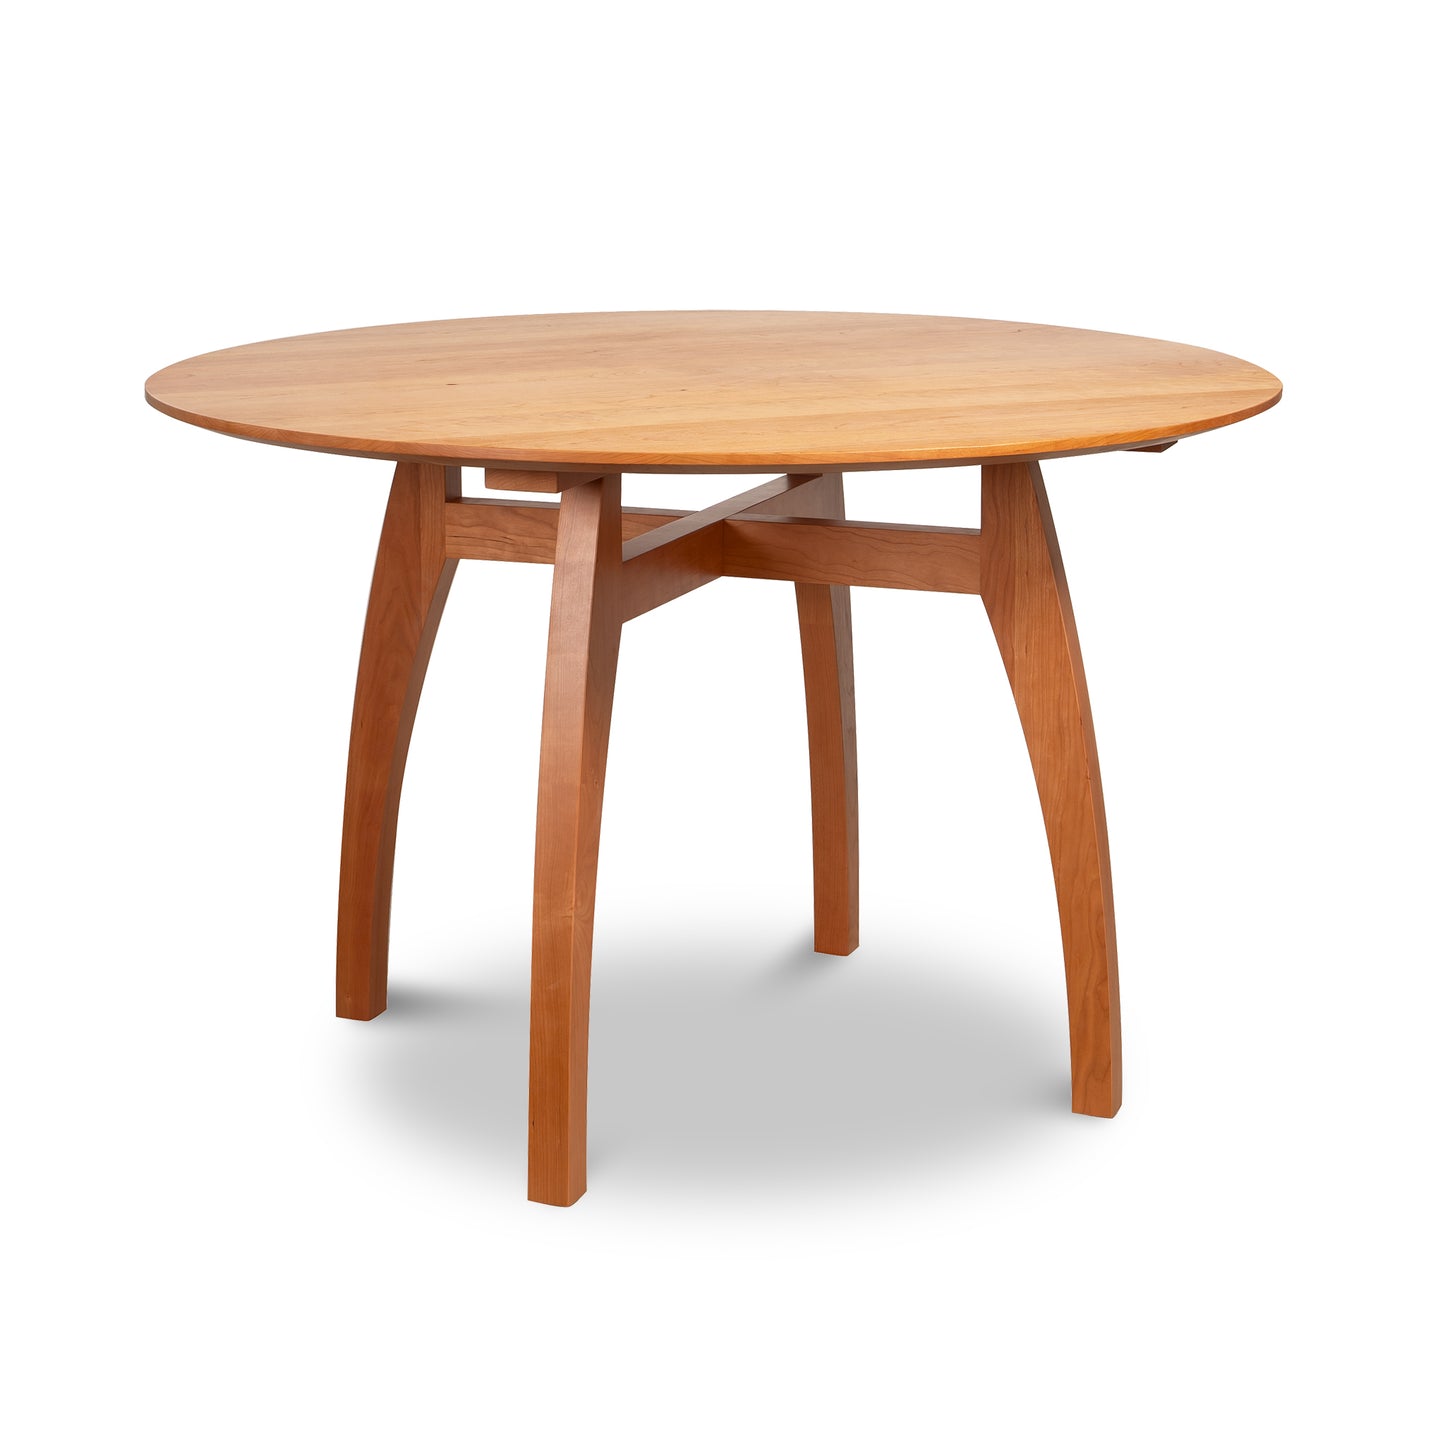 A Lyndon Furniture Vermont Modern Round Solid Top Pedestal Table, handcrafted with organic wood, featuring a round shape and two sturdy legs supporting the beautiful wooden top.